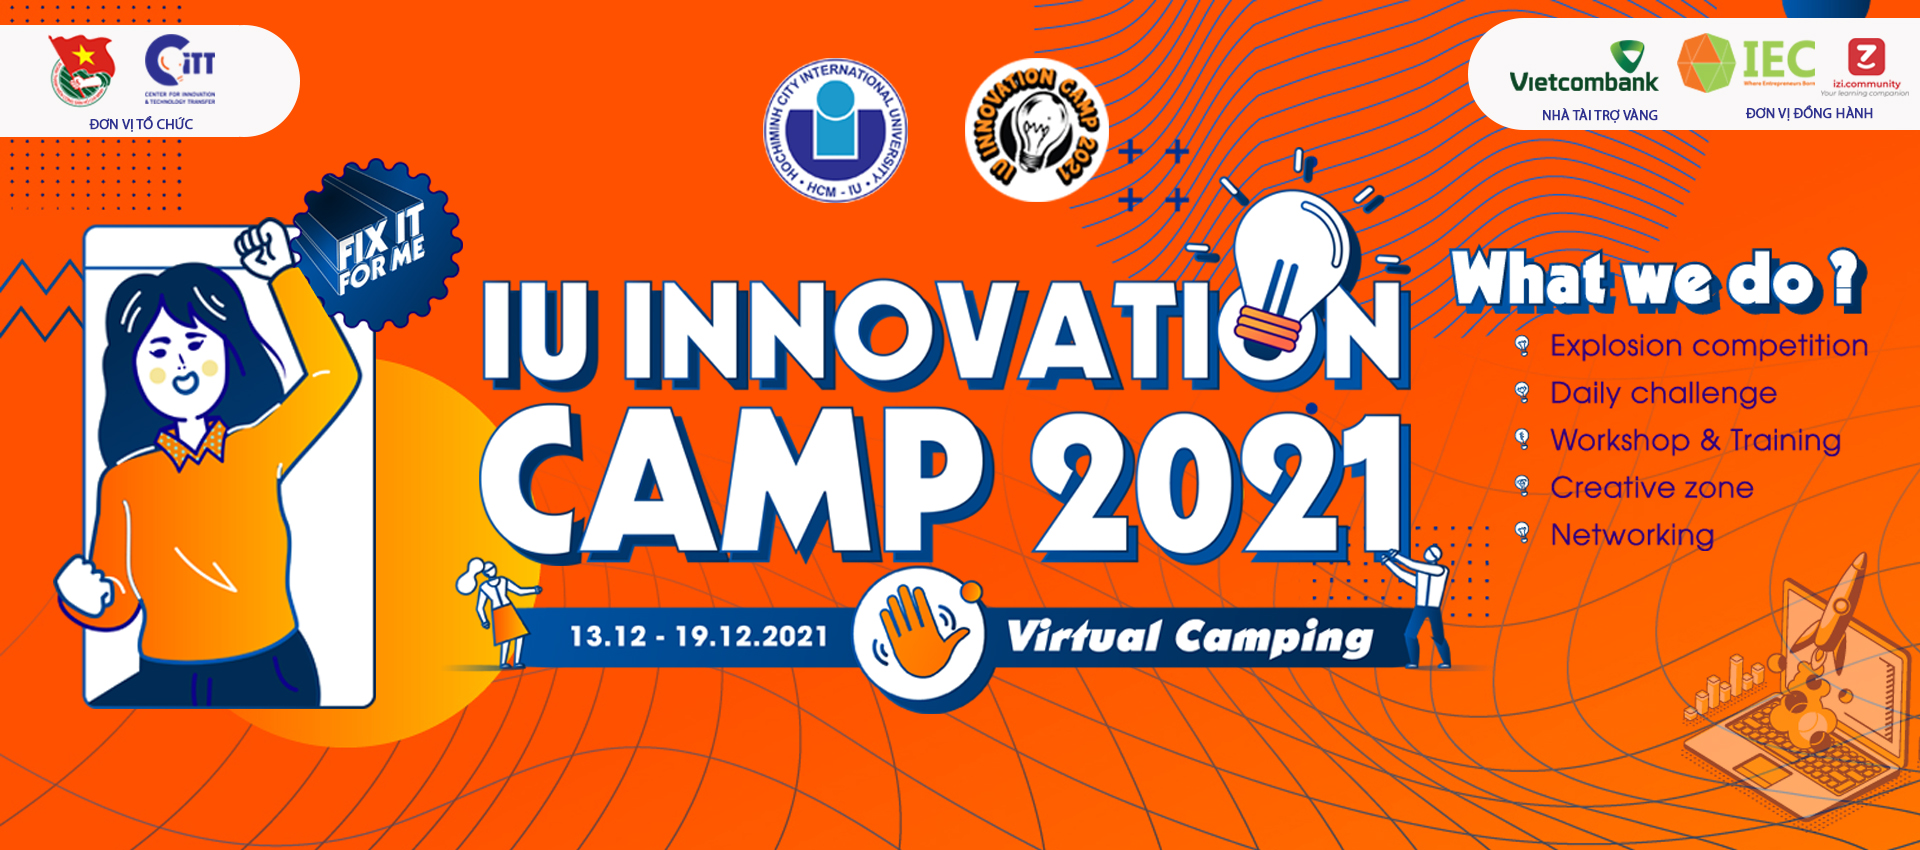 7 DAYS WITH THE FIRST VIRTUAL CAMPING IN HCMC